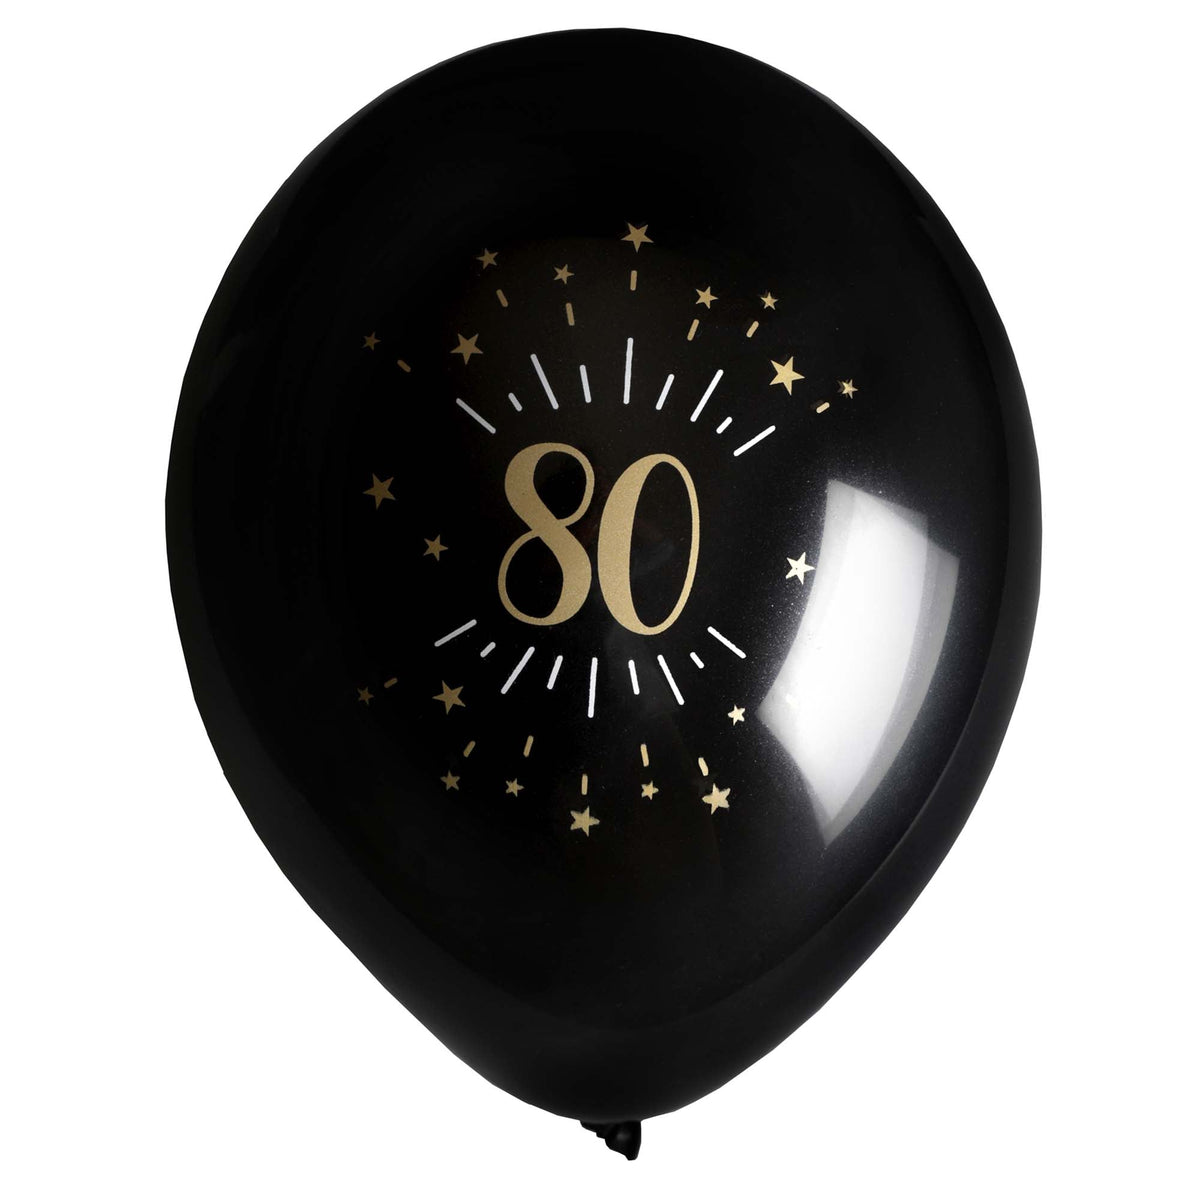 SANTEX Age Specific Birthday Black and Gold 80th Birthday Latex Balloons, 12 Inches, 6 Count 3660380070450